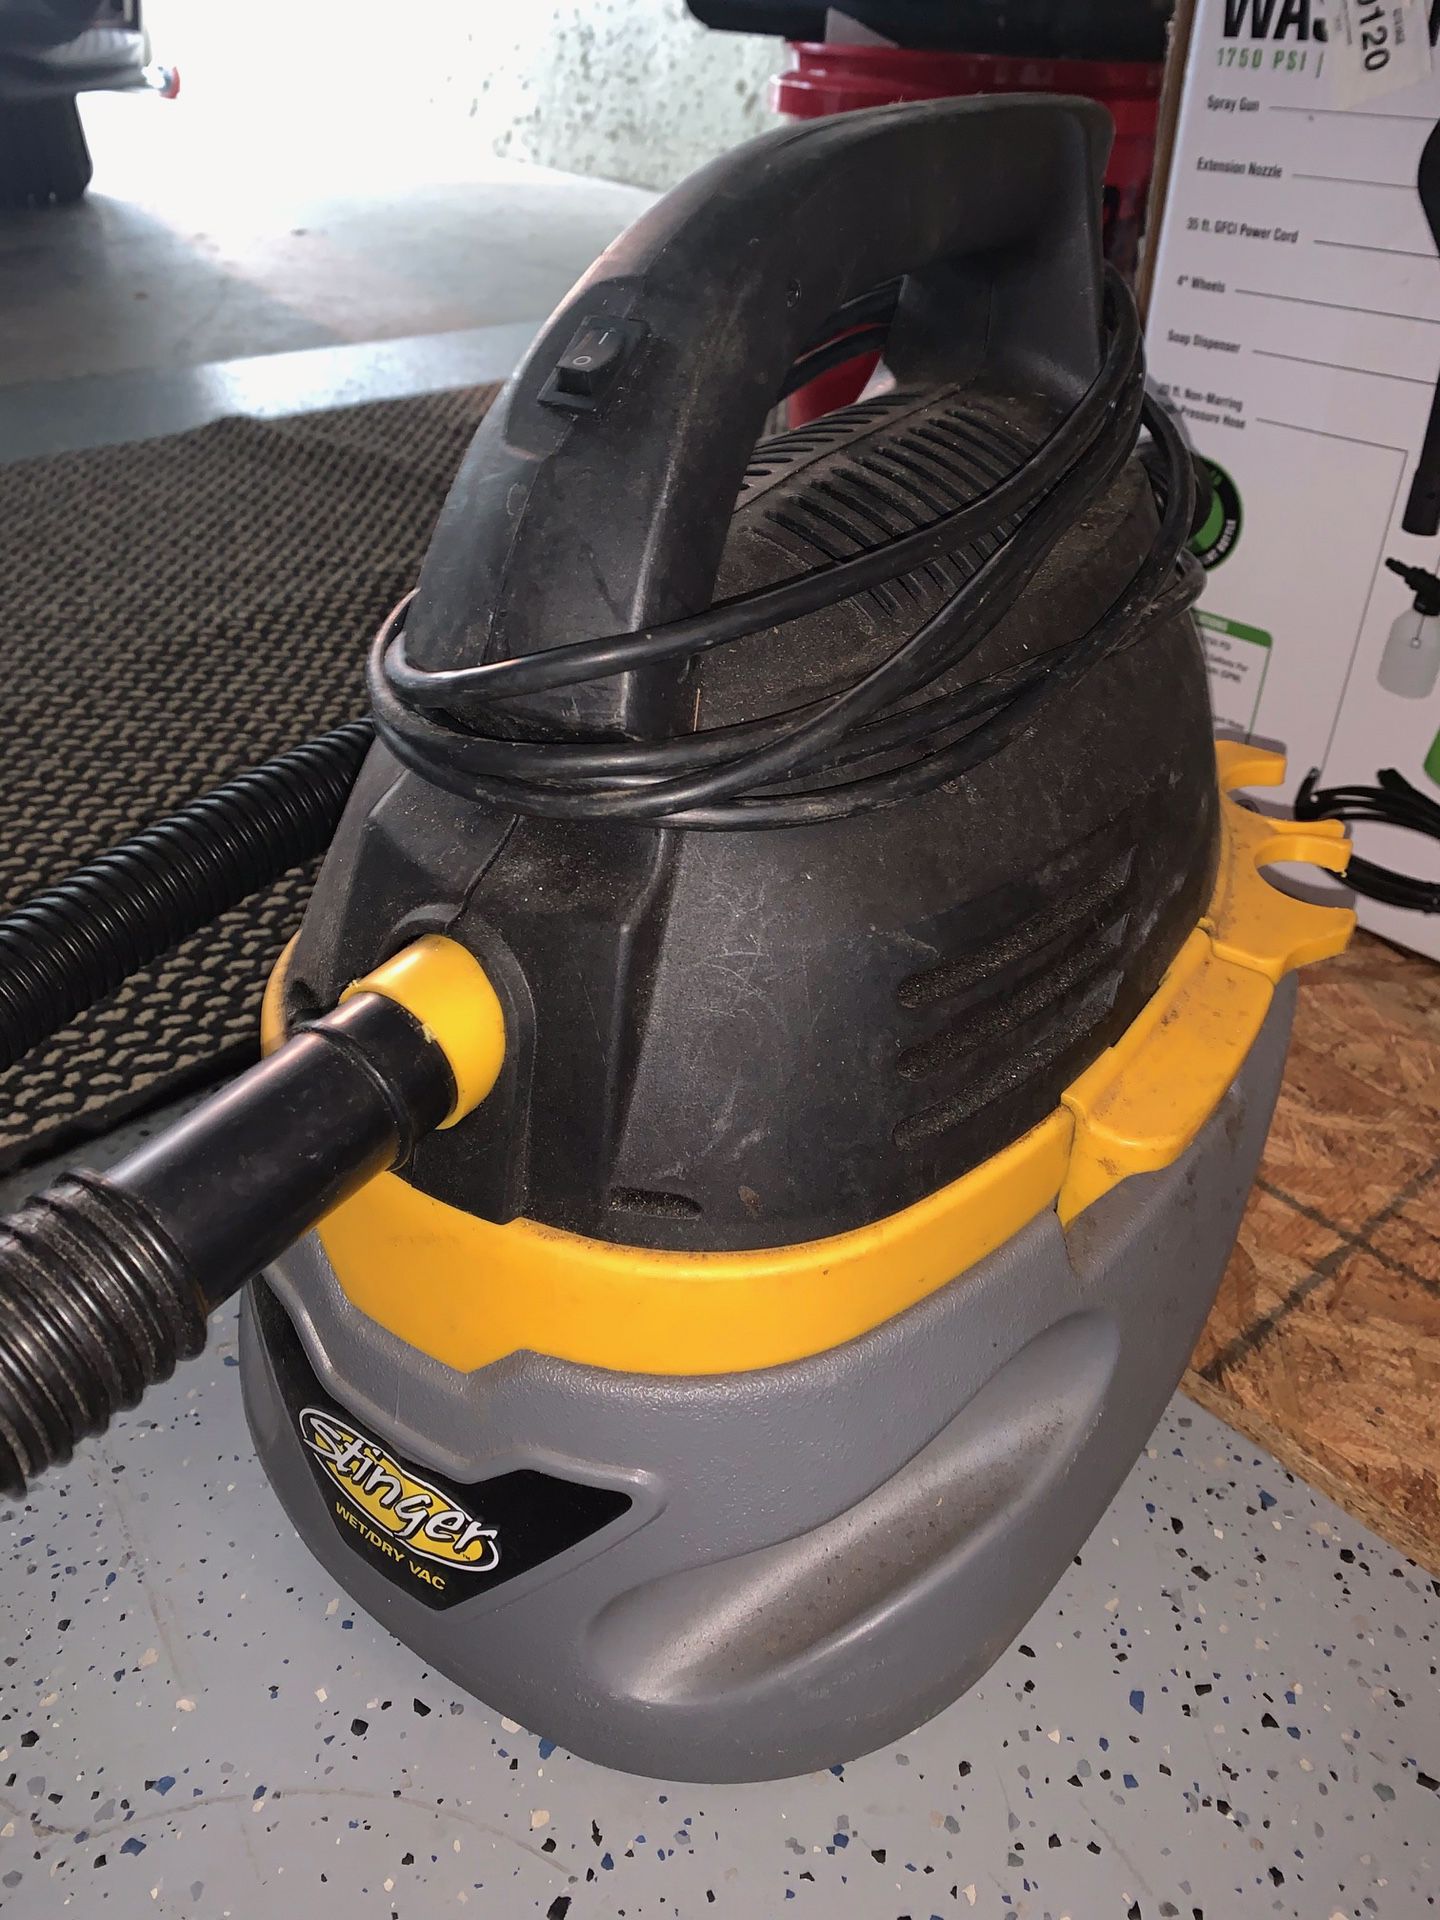 Used small vacuum with hoses and accessories works fine